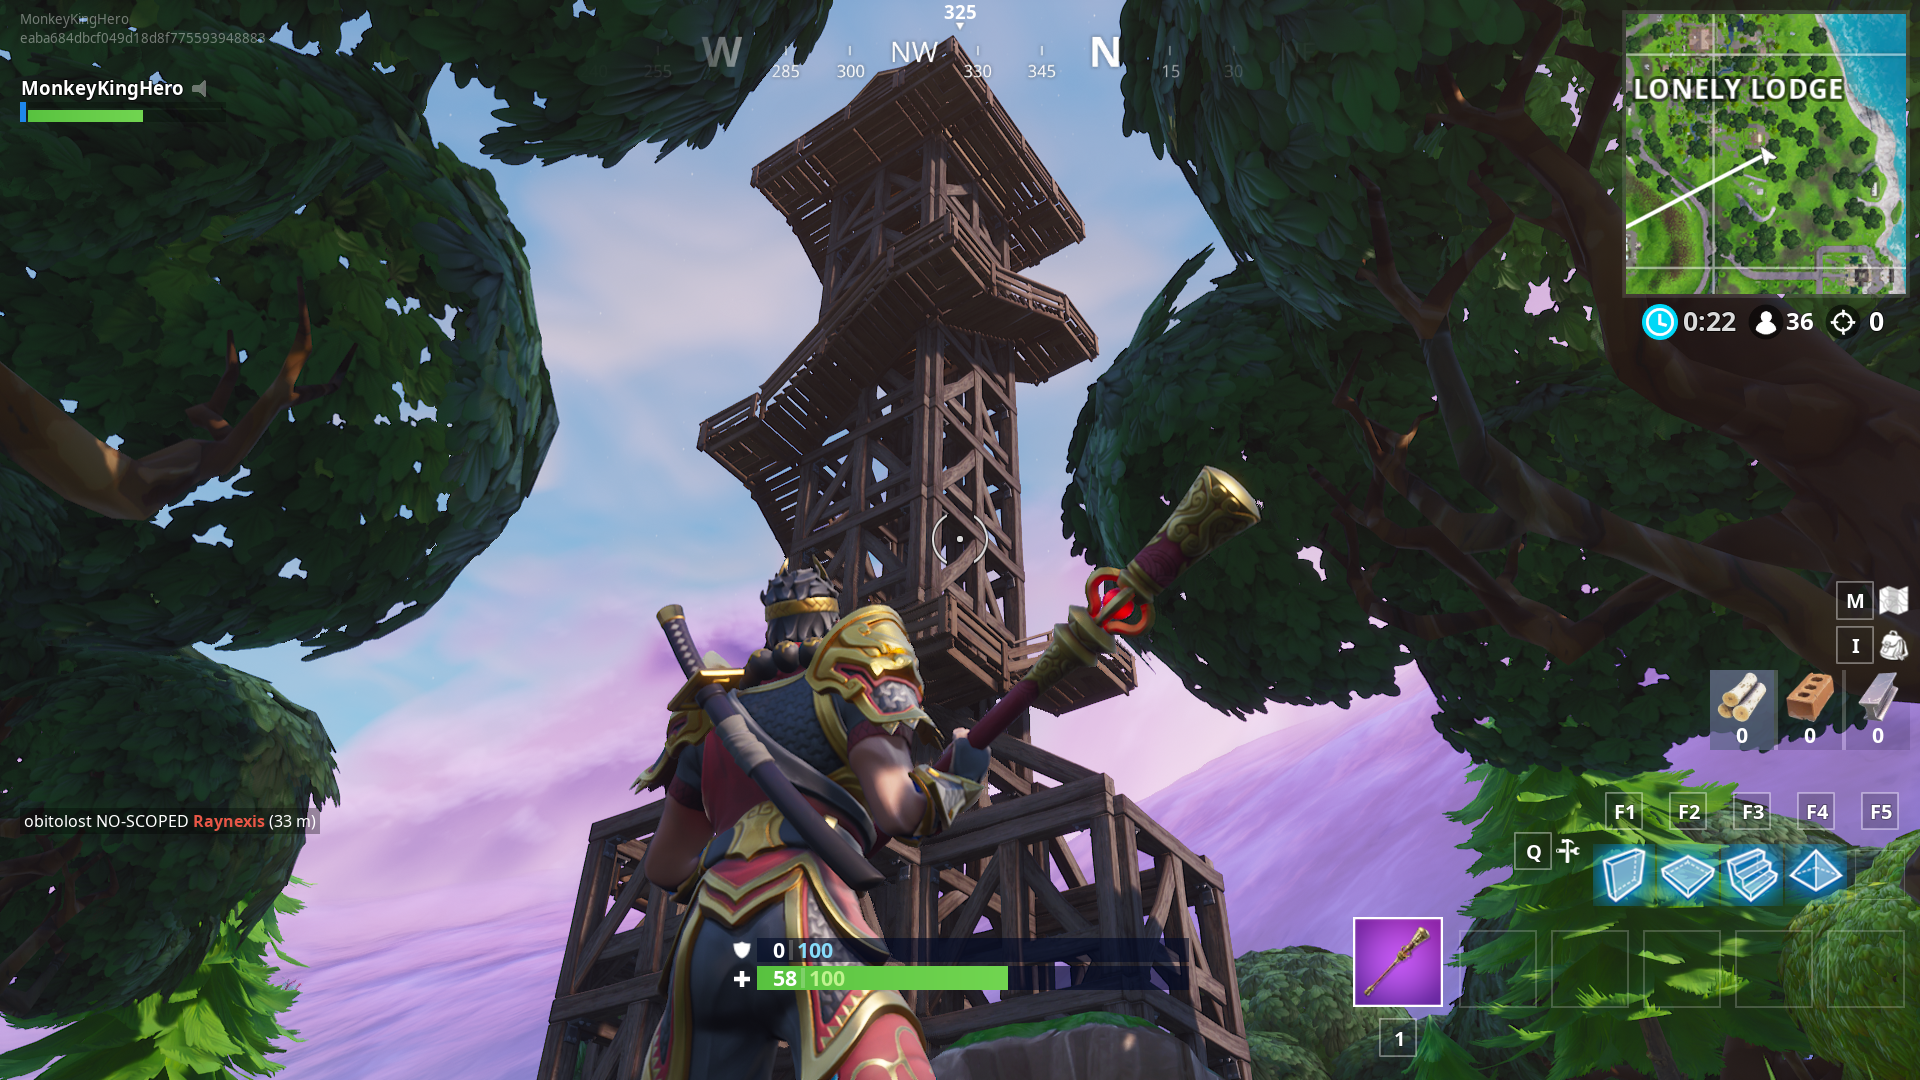 how to complete the dance on top of a water tower challenge in fortnite season 7 week 5 - fortnite how to dance on top of a metal turtle